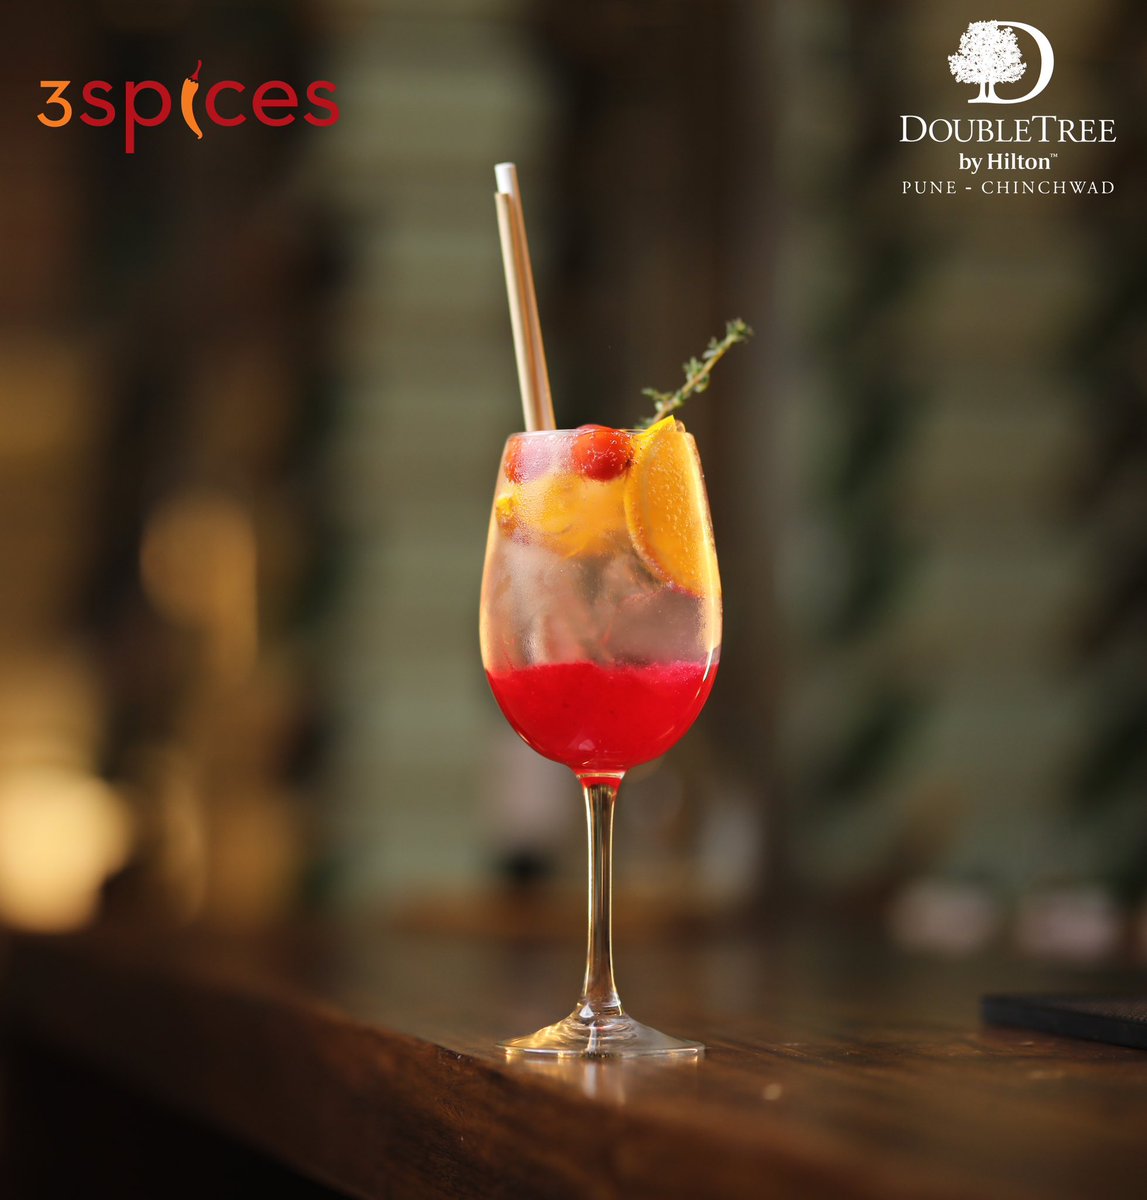 Indulge in serenity, sip by sip. Our innovative mocktails offer a refreshing and flavorful way to unwind after a long day. Settle into our comfortable ambiance with every delicious drop.

#CulinaryExperience #FoodandDrink #Punefood #drinks #punehotels #doubletreebyhilton
#3Spices